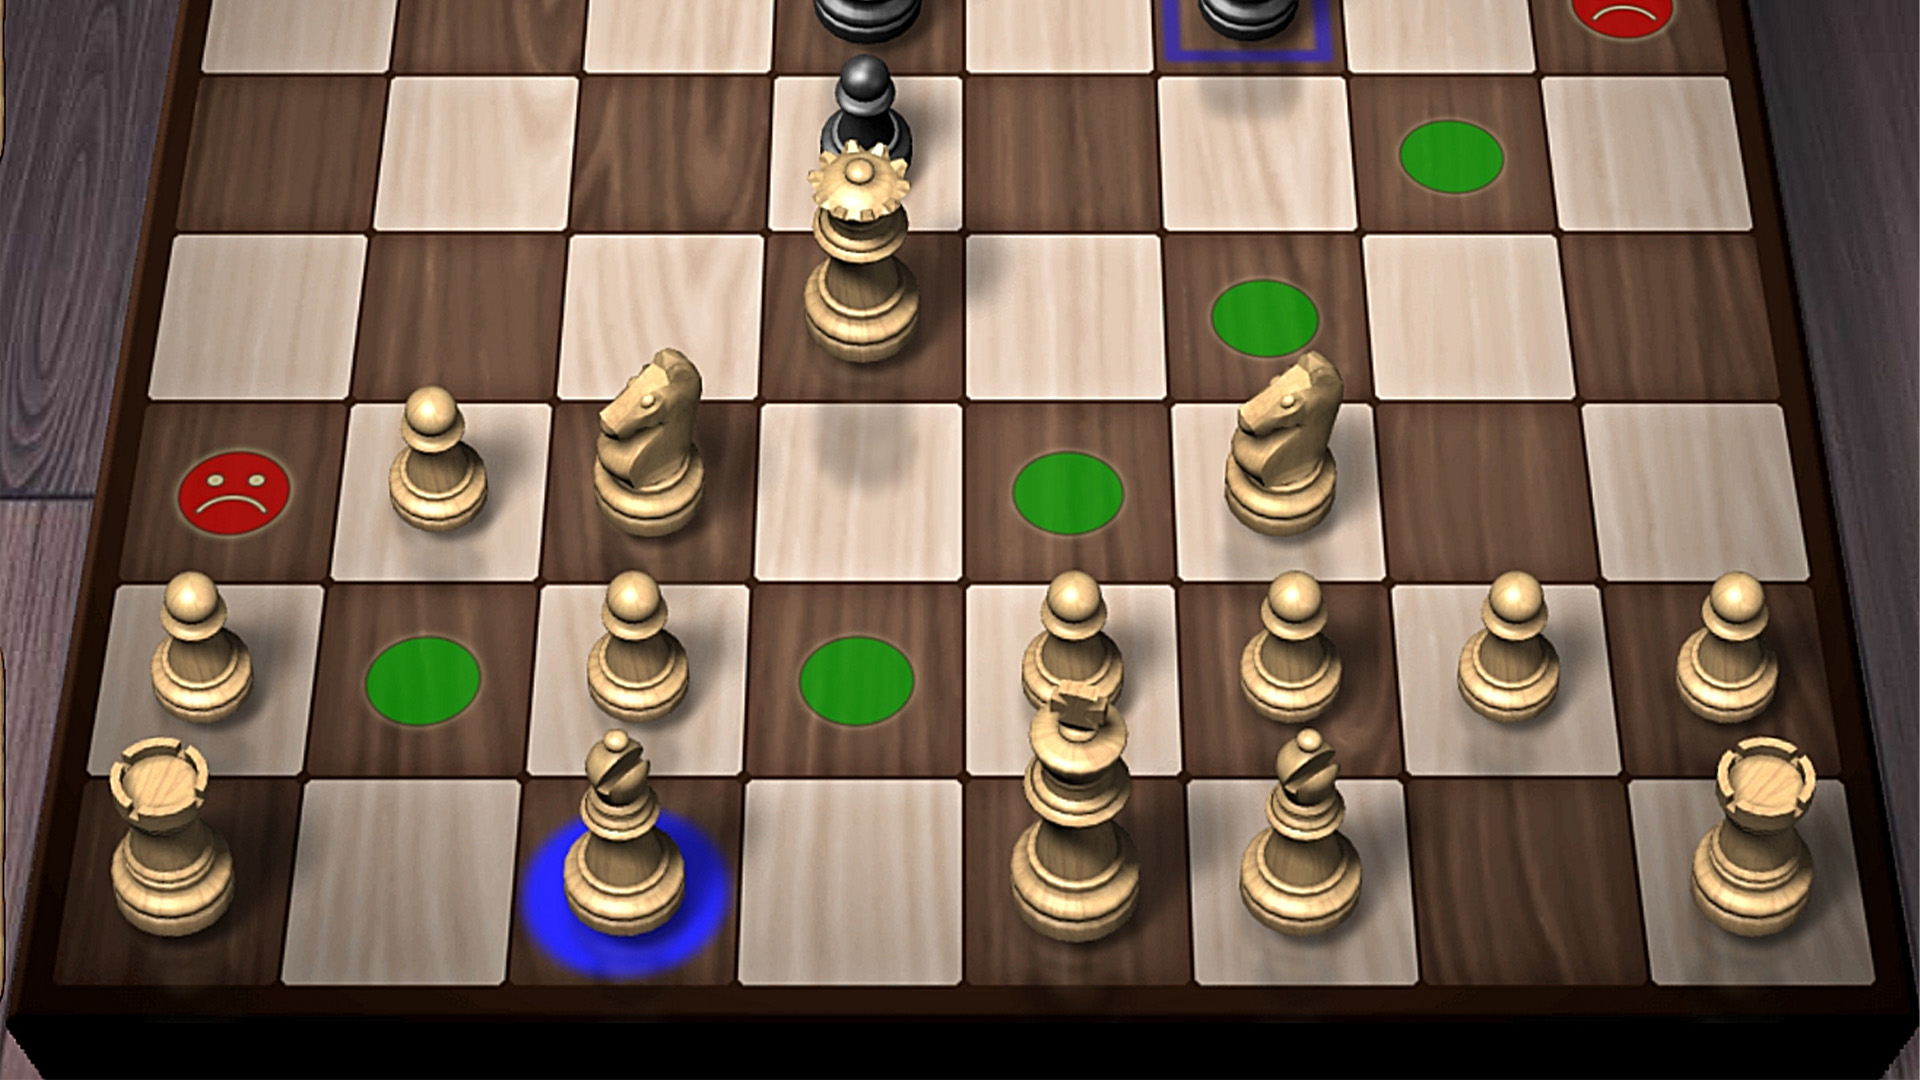 Follow Chess Android - Quick and easy access to Standings and All